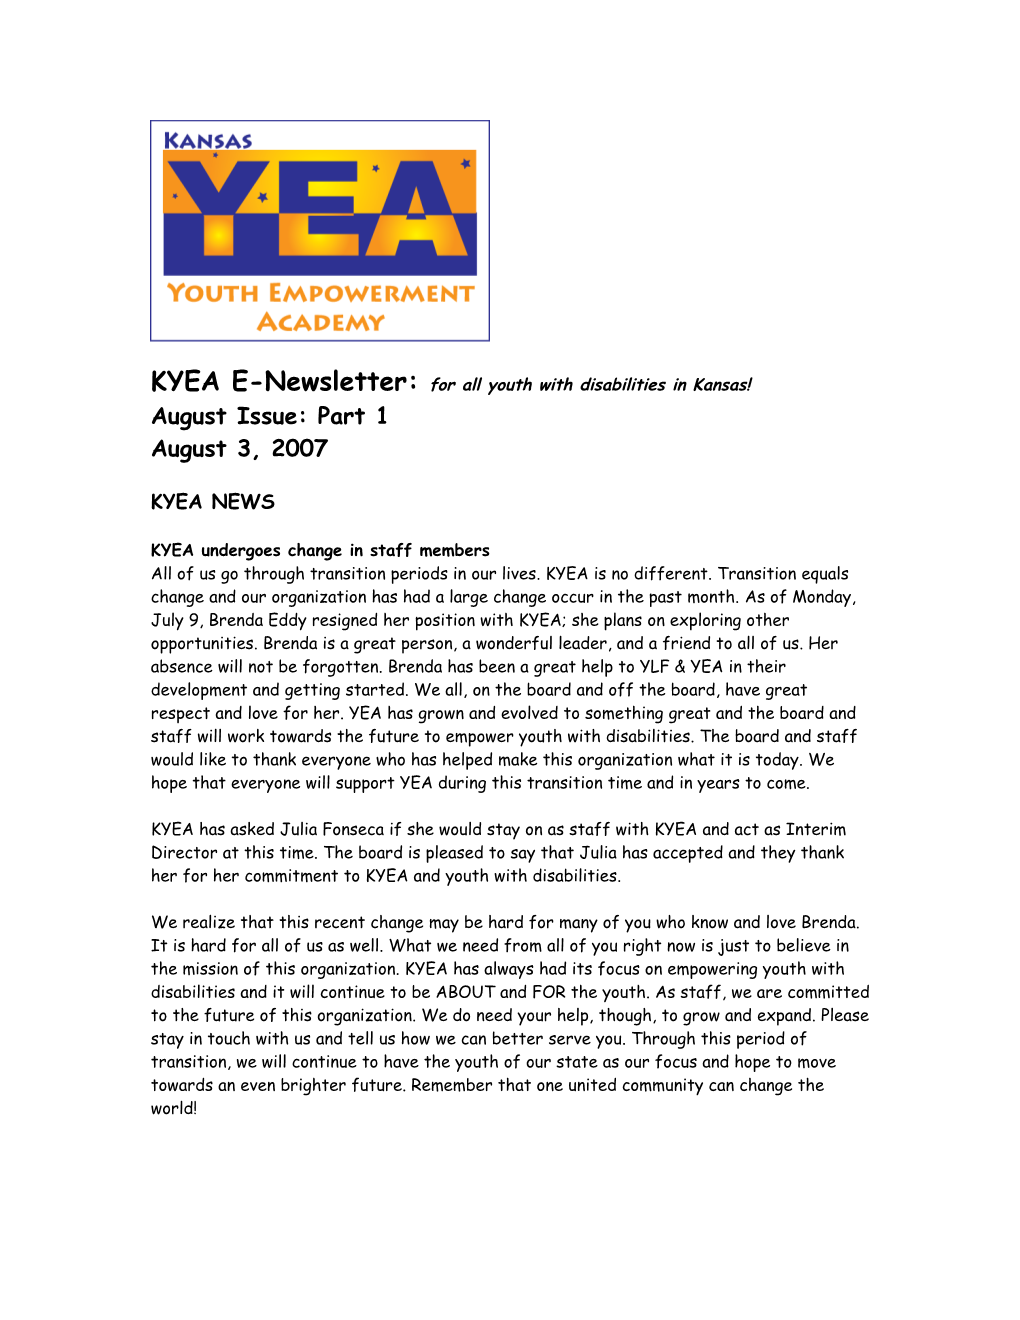 KYEA E-Newsletter: for All Youth with Disabilities in Kansas! s1